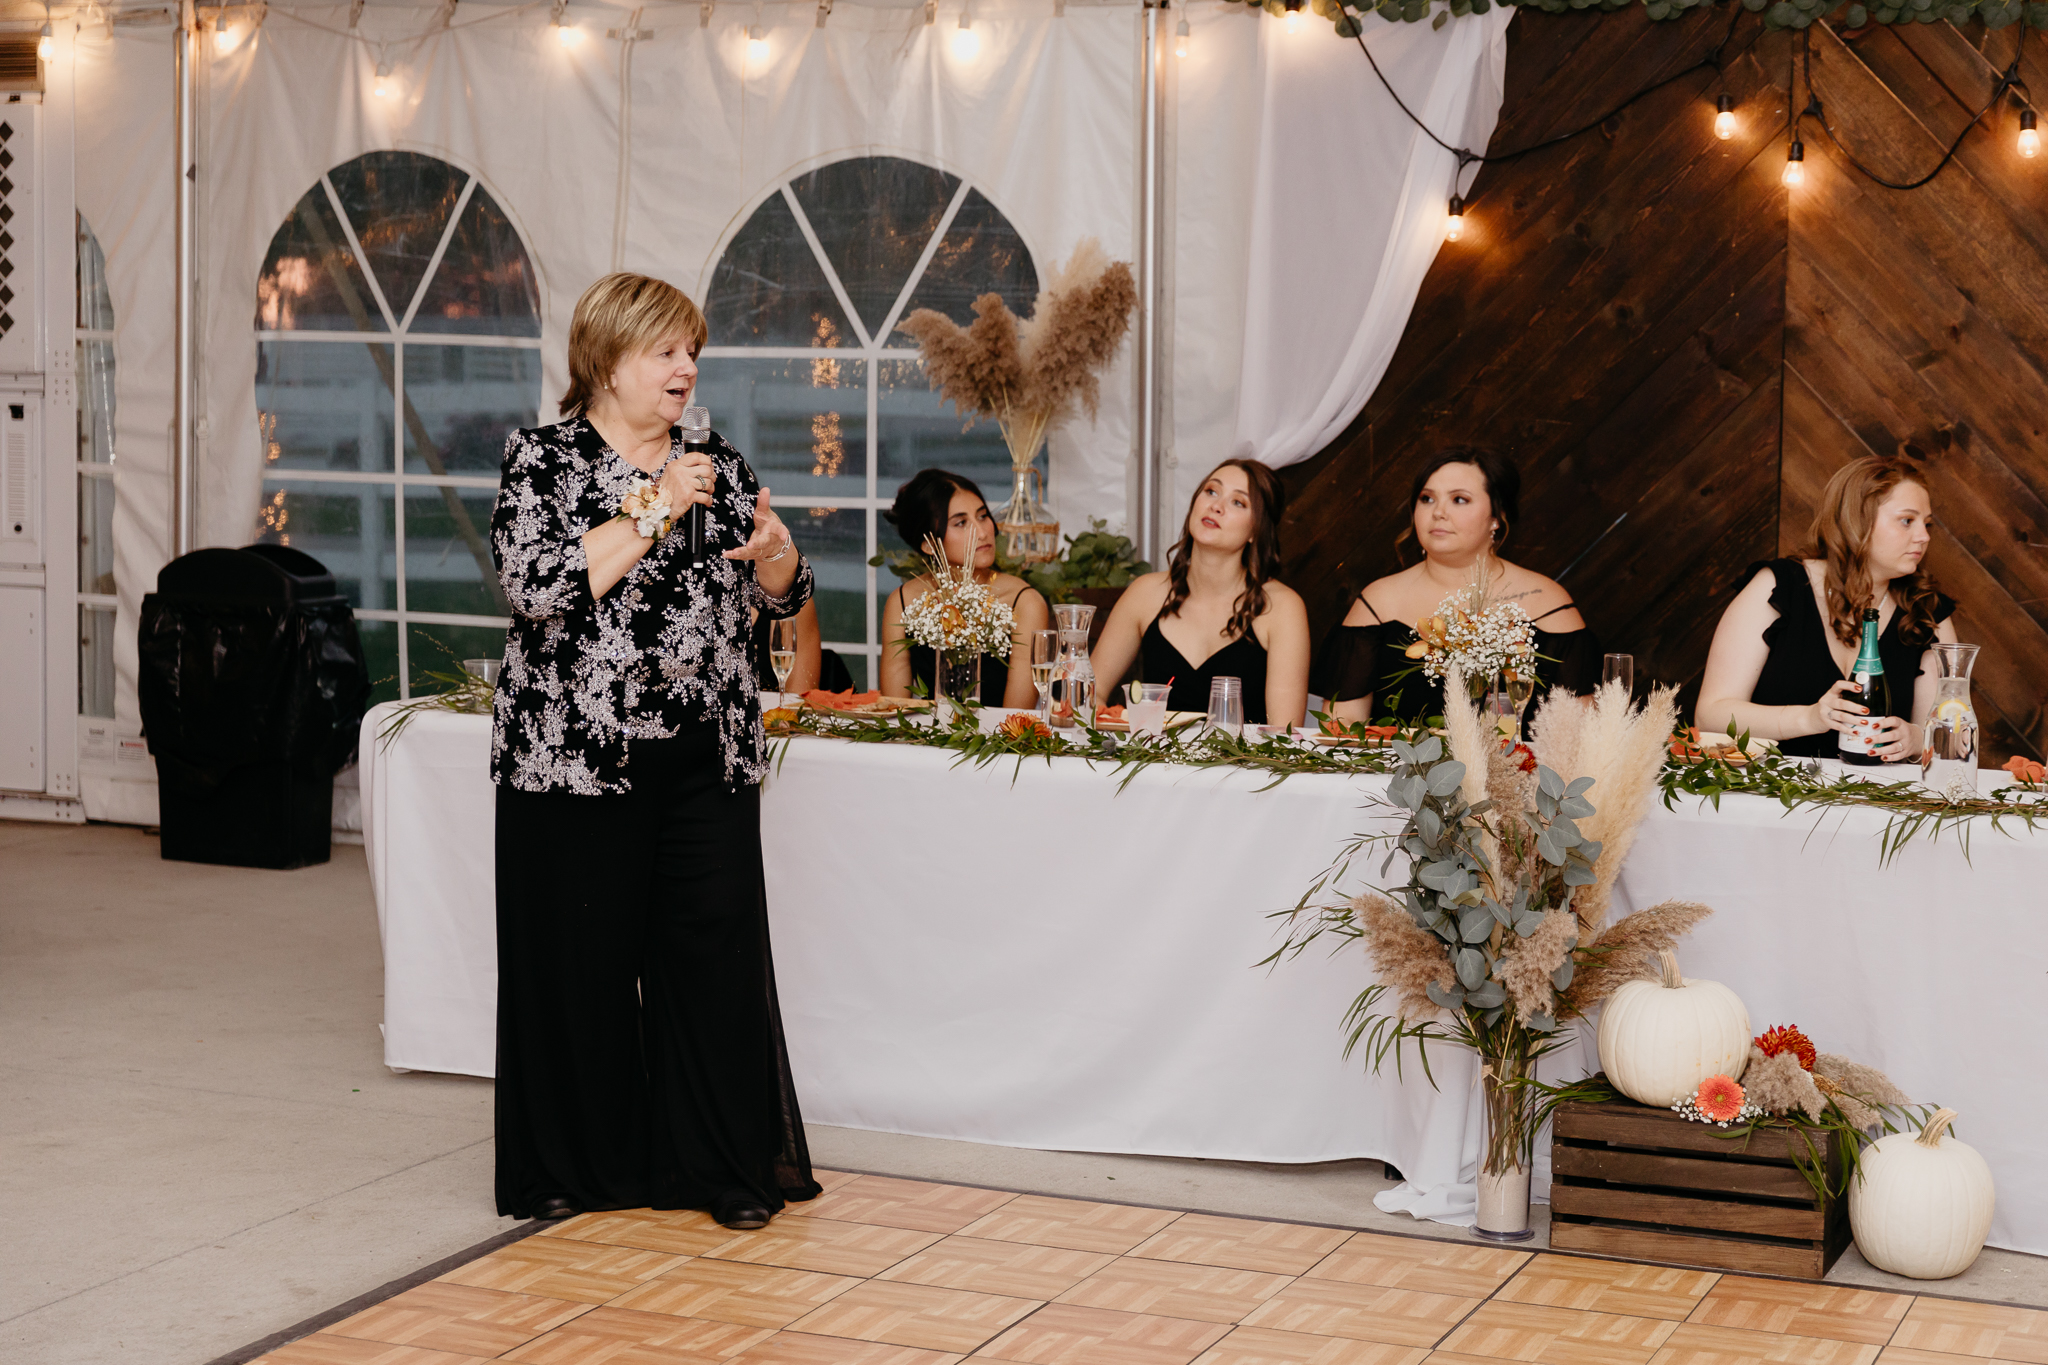 Aunt gives speech standing at white tent wedding